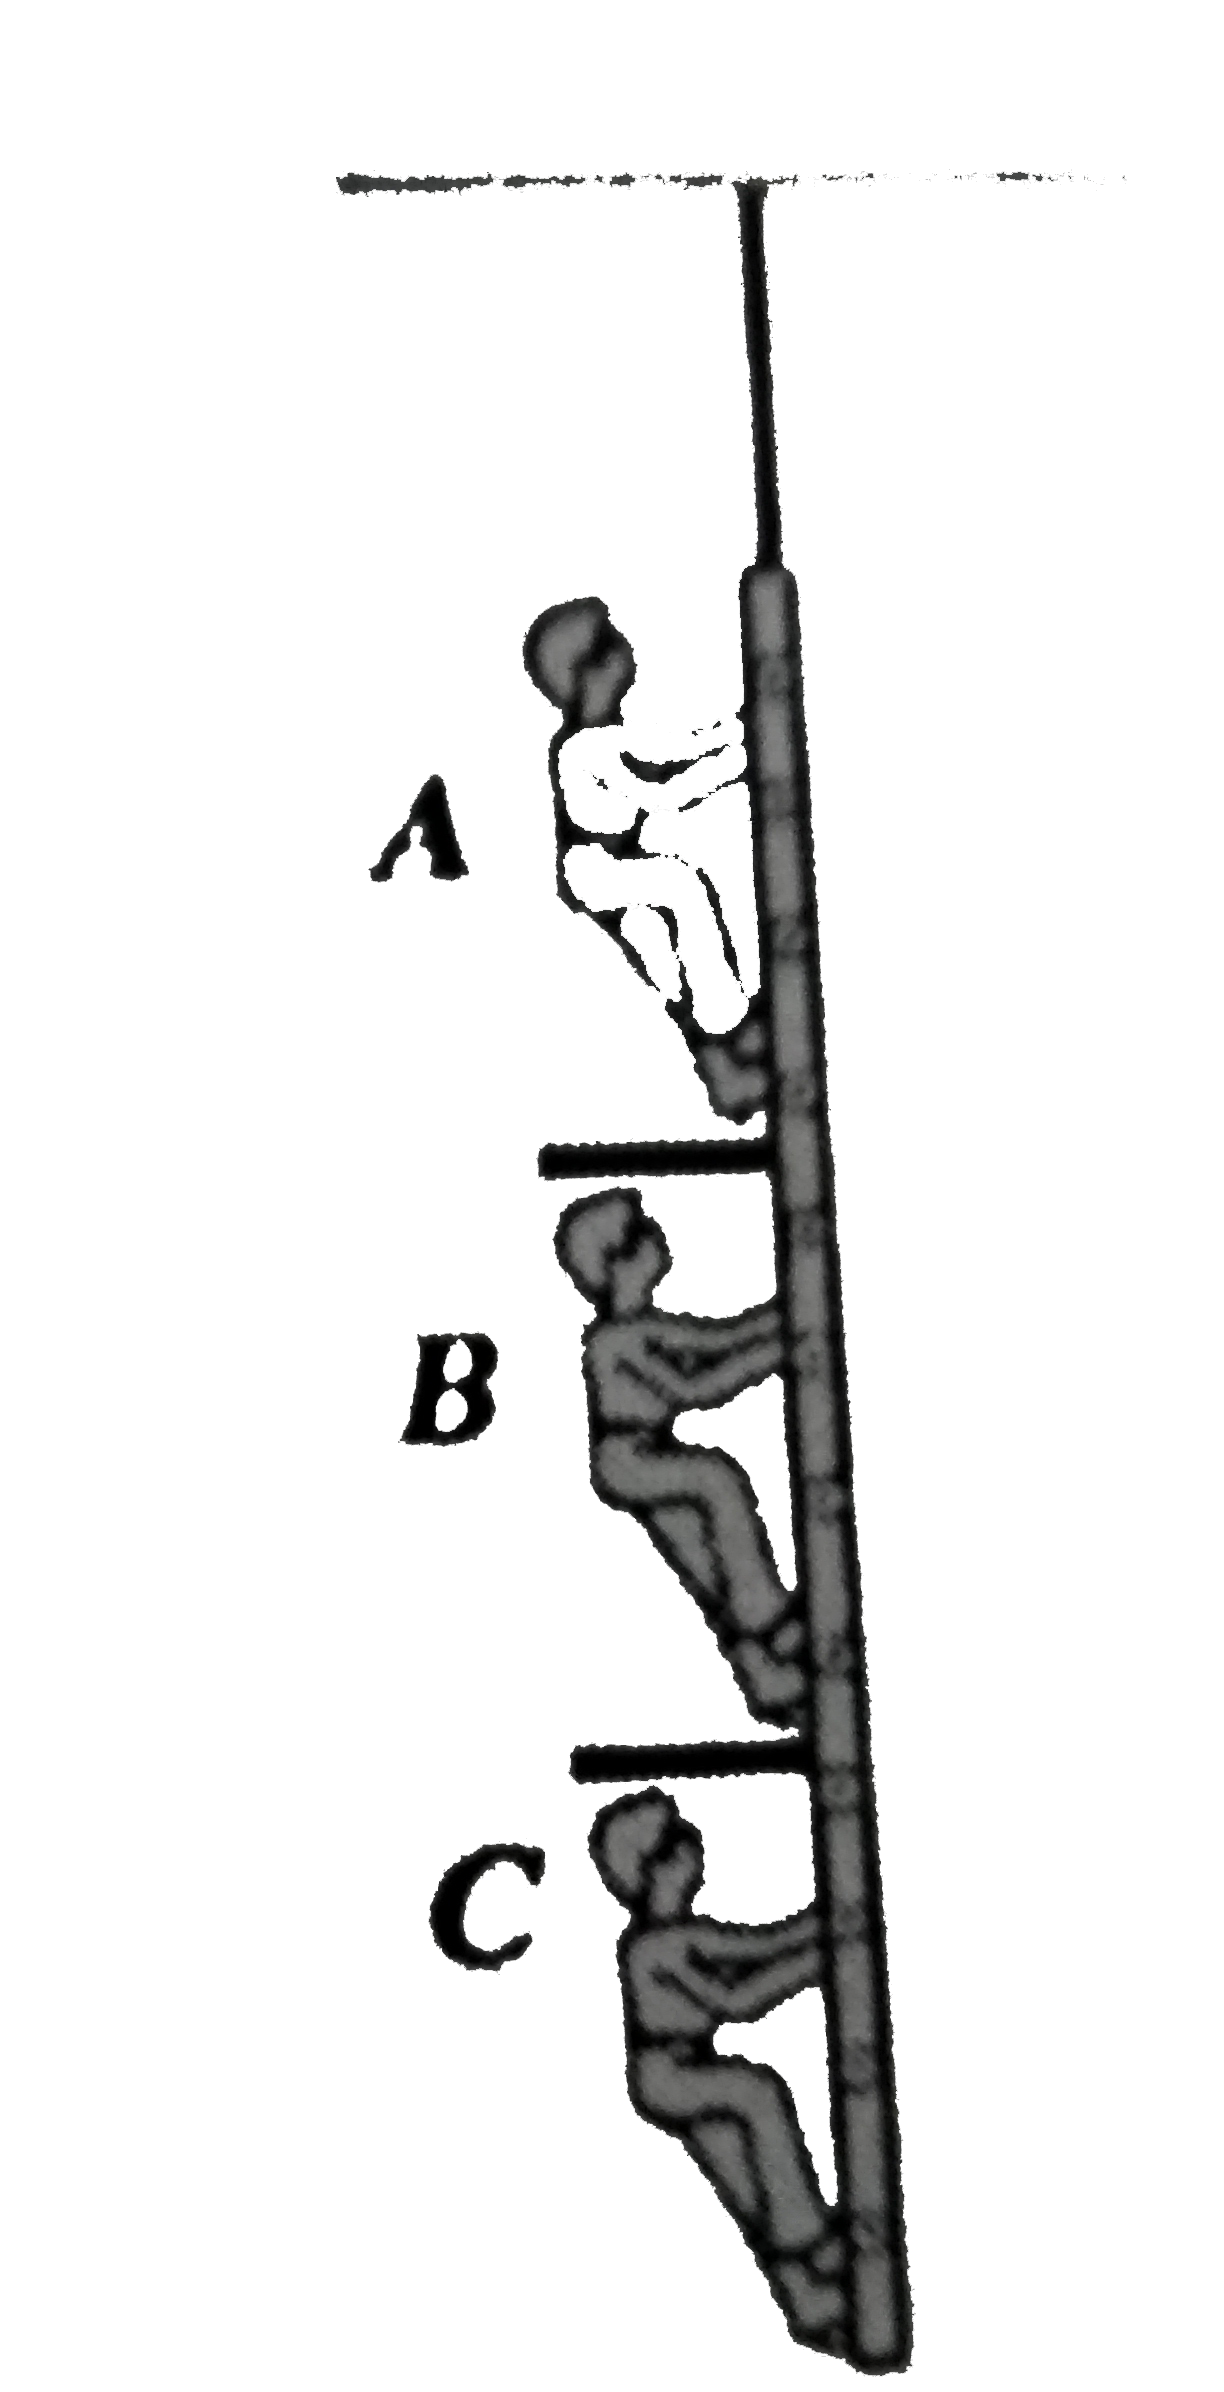 A ladder is hanging from ceiling as shownin figure. Three men A, B and C of masses 40 kg, 60 kg, and 50 kg are climbing the ladder. Man A is going up with retardation 2m//s^(2), C is going up with an acceleration of 1m//s^(2) and man B is going up with a constantg speed of 0.5 m/s. Find the tension in the string supporting the ledder. [g=9.8m//s^(2)]